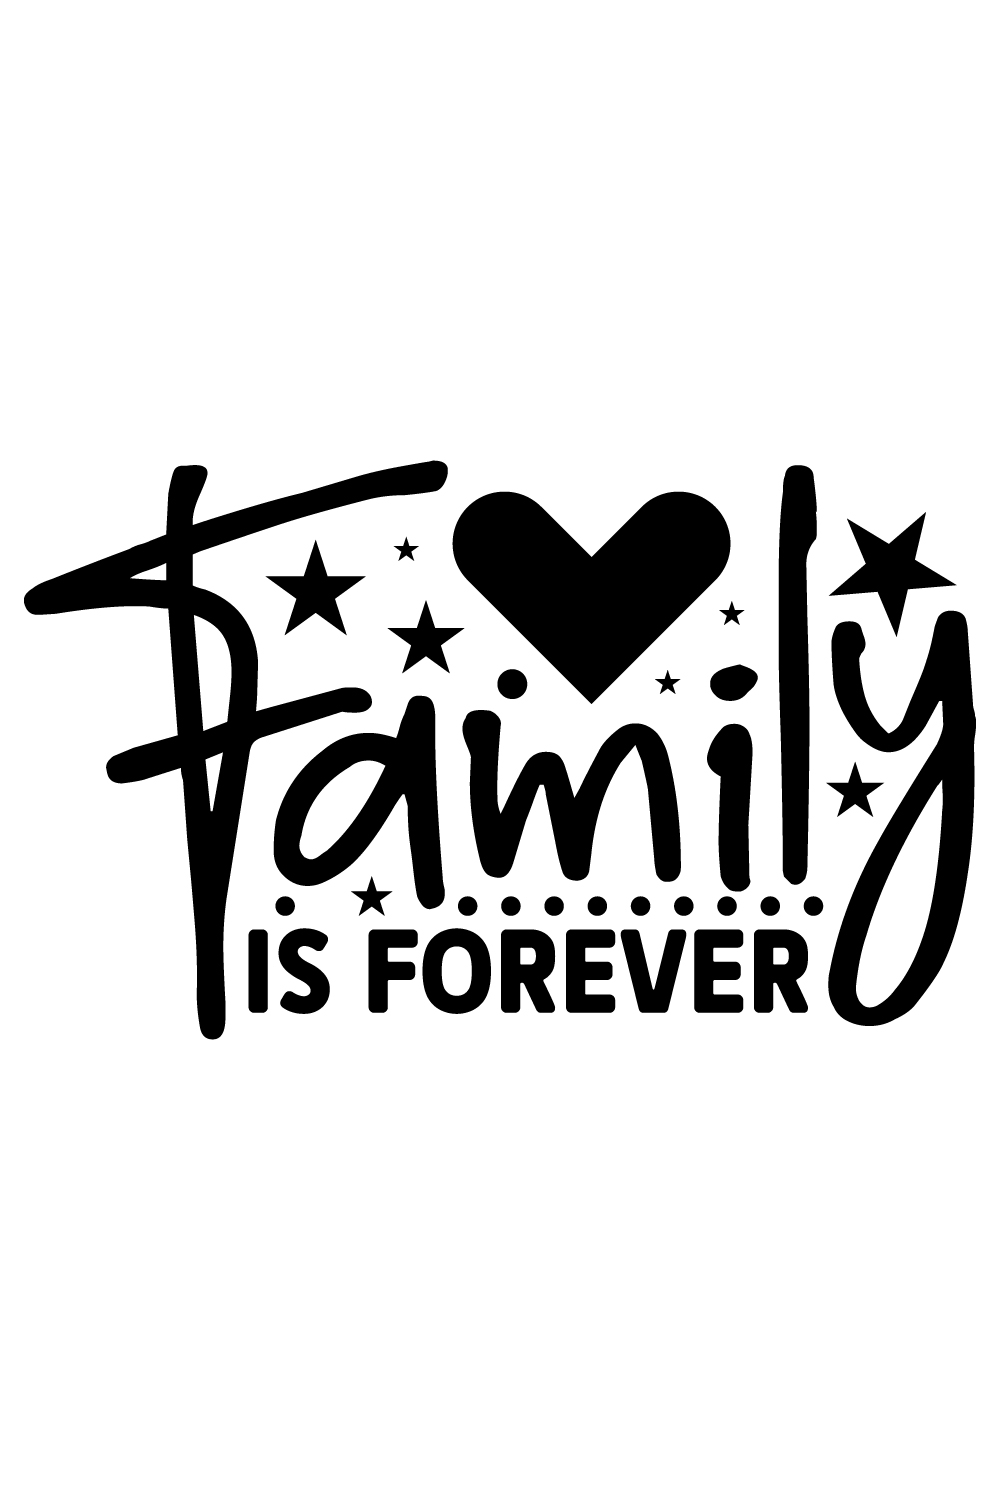 Family is forever pinterest preview image.